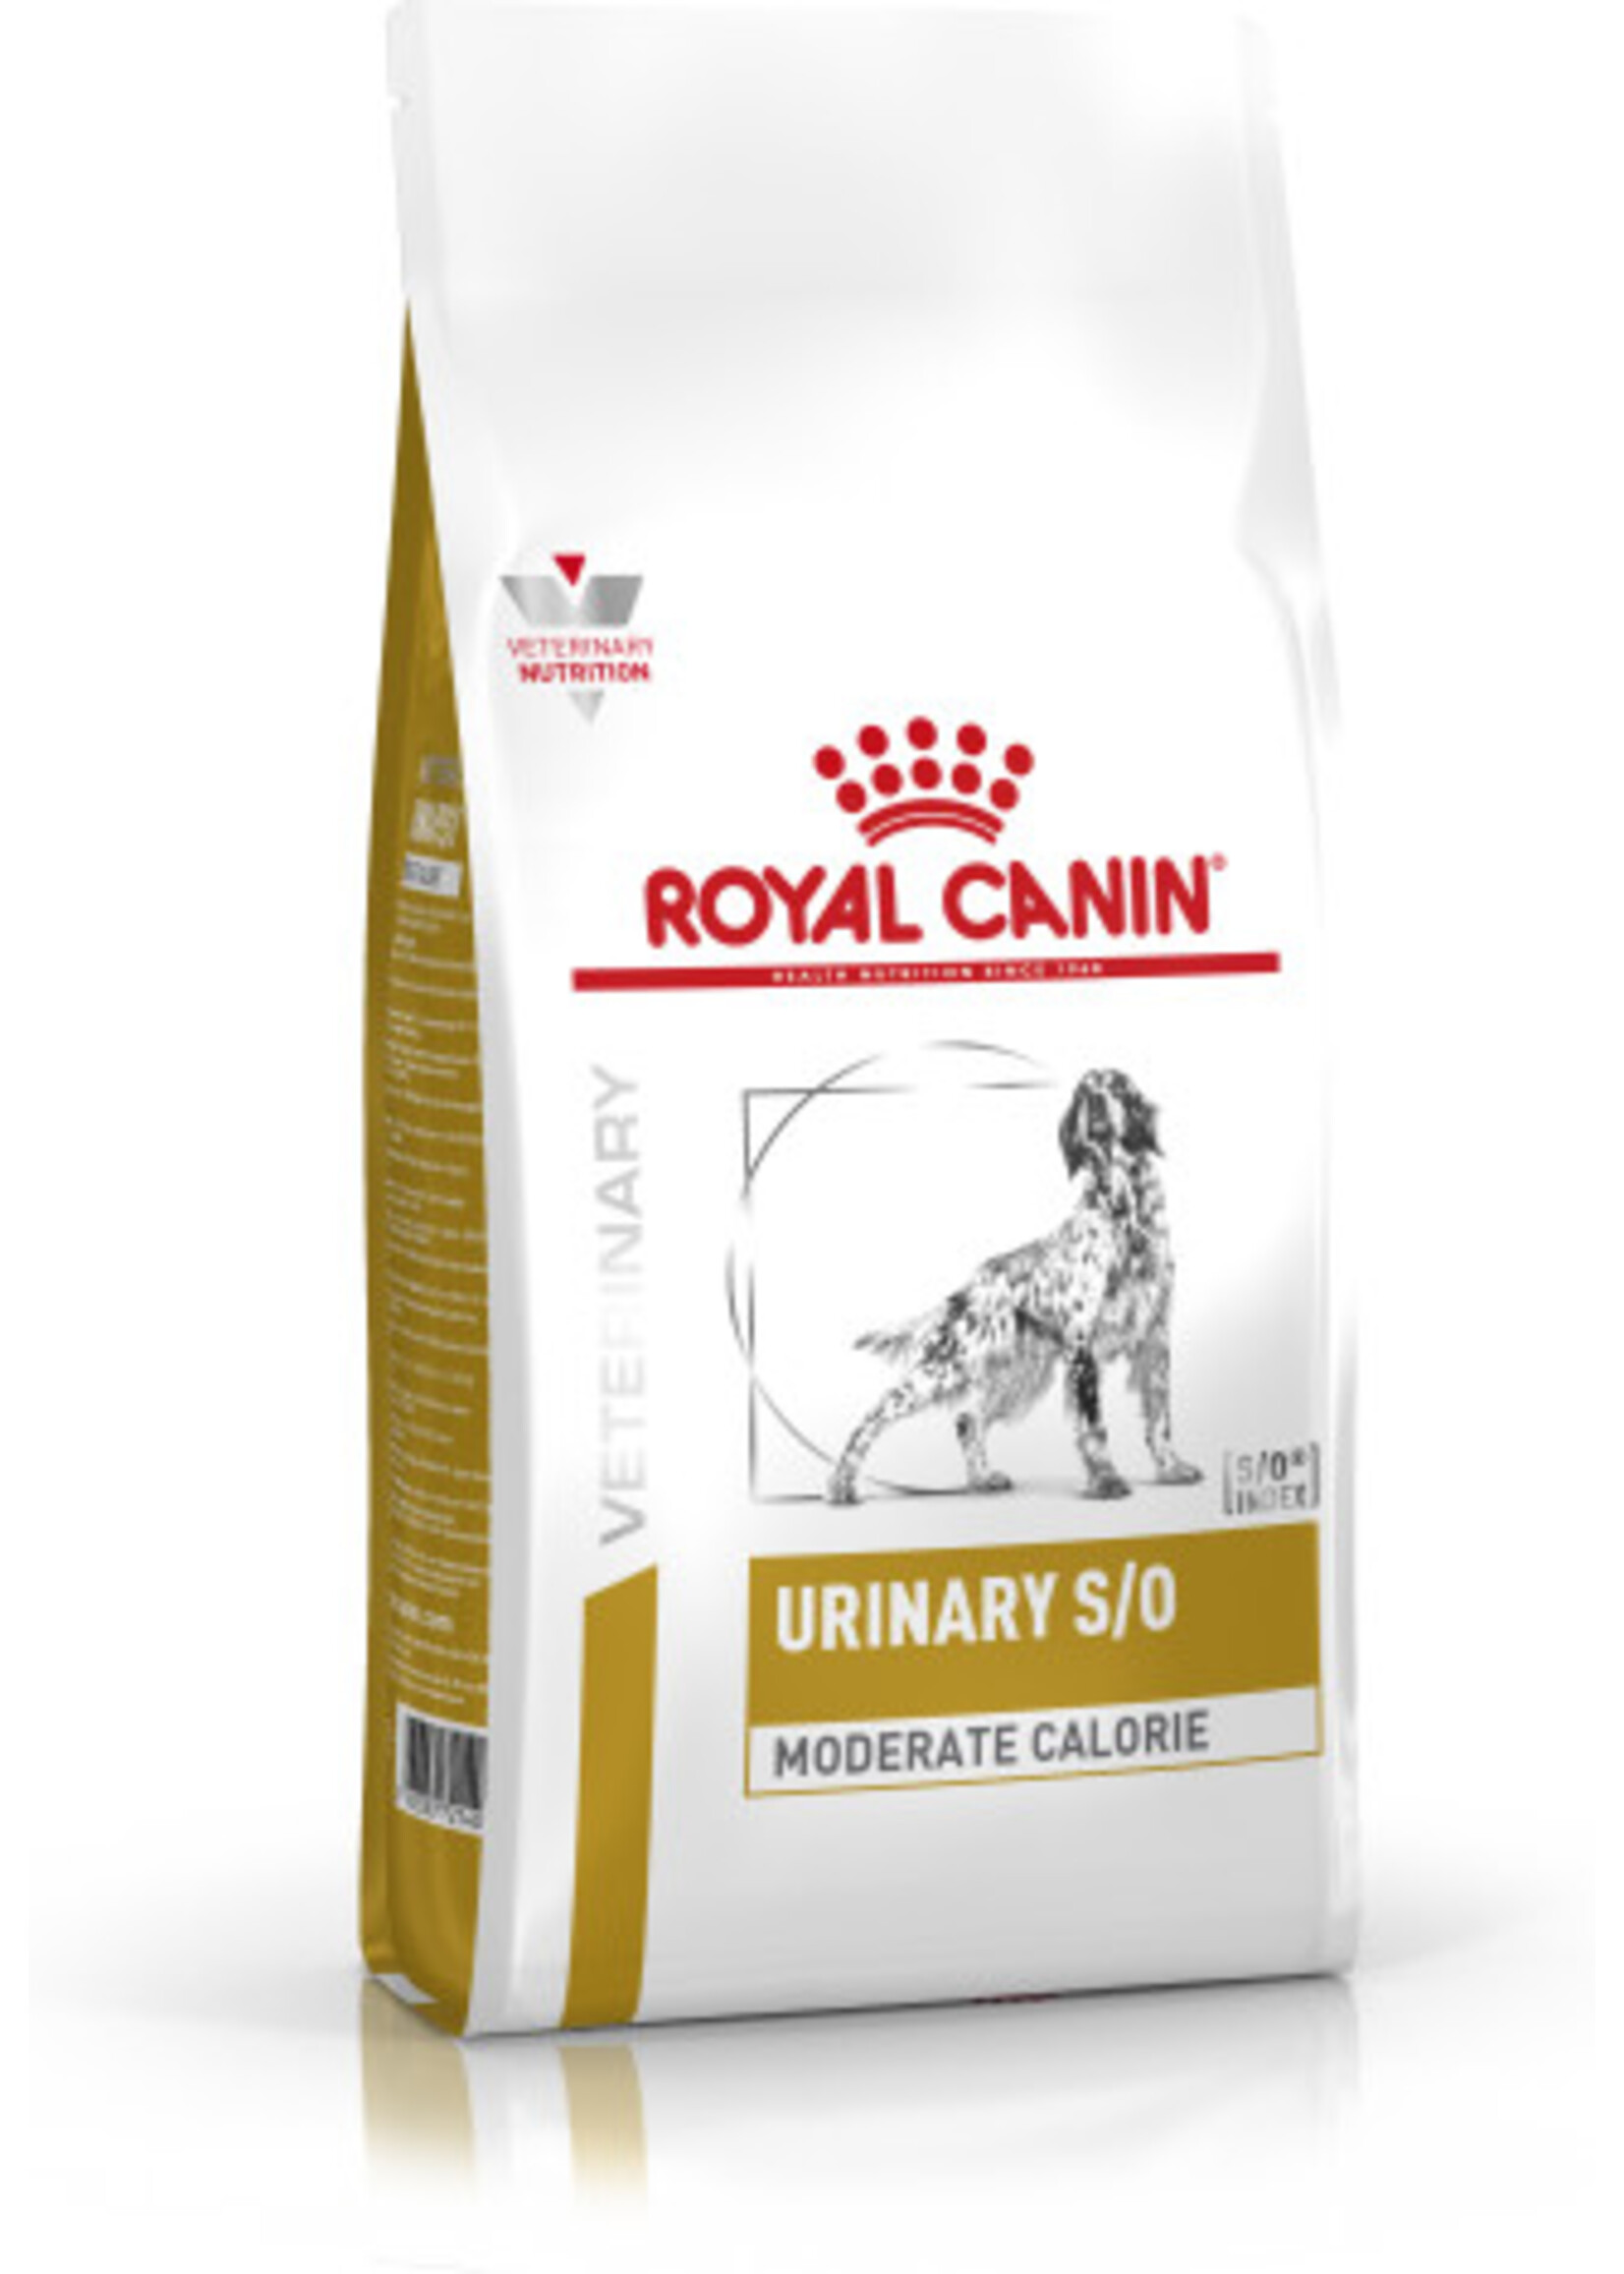 Royal Canin Royal Canin Urinary S/o Moderate Calorie Hond 12kg